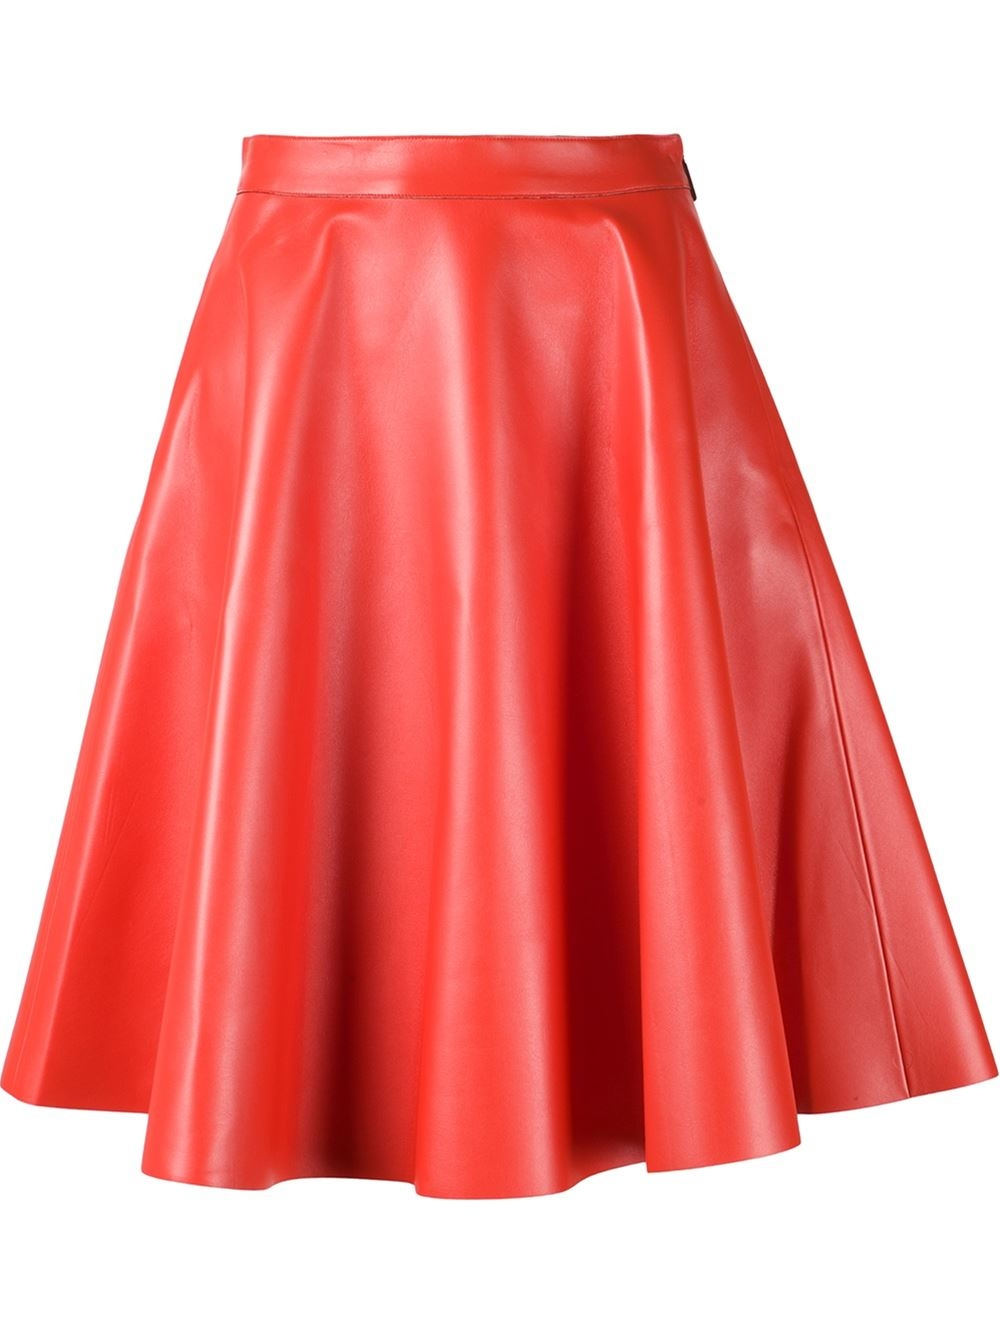 Msgm Faux Leather Skirt in Red | Lyst